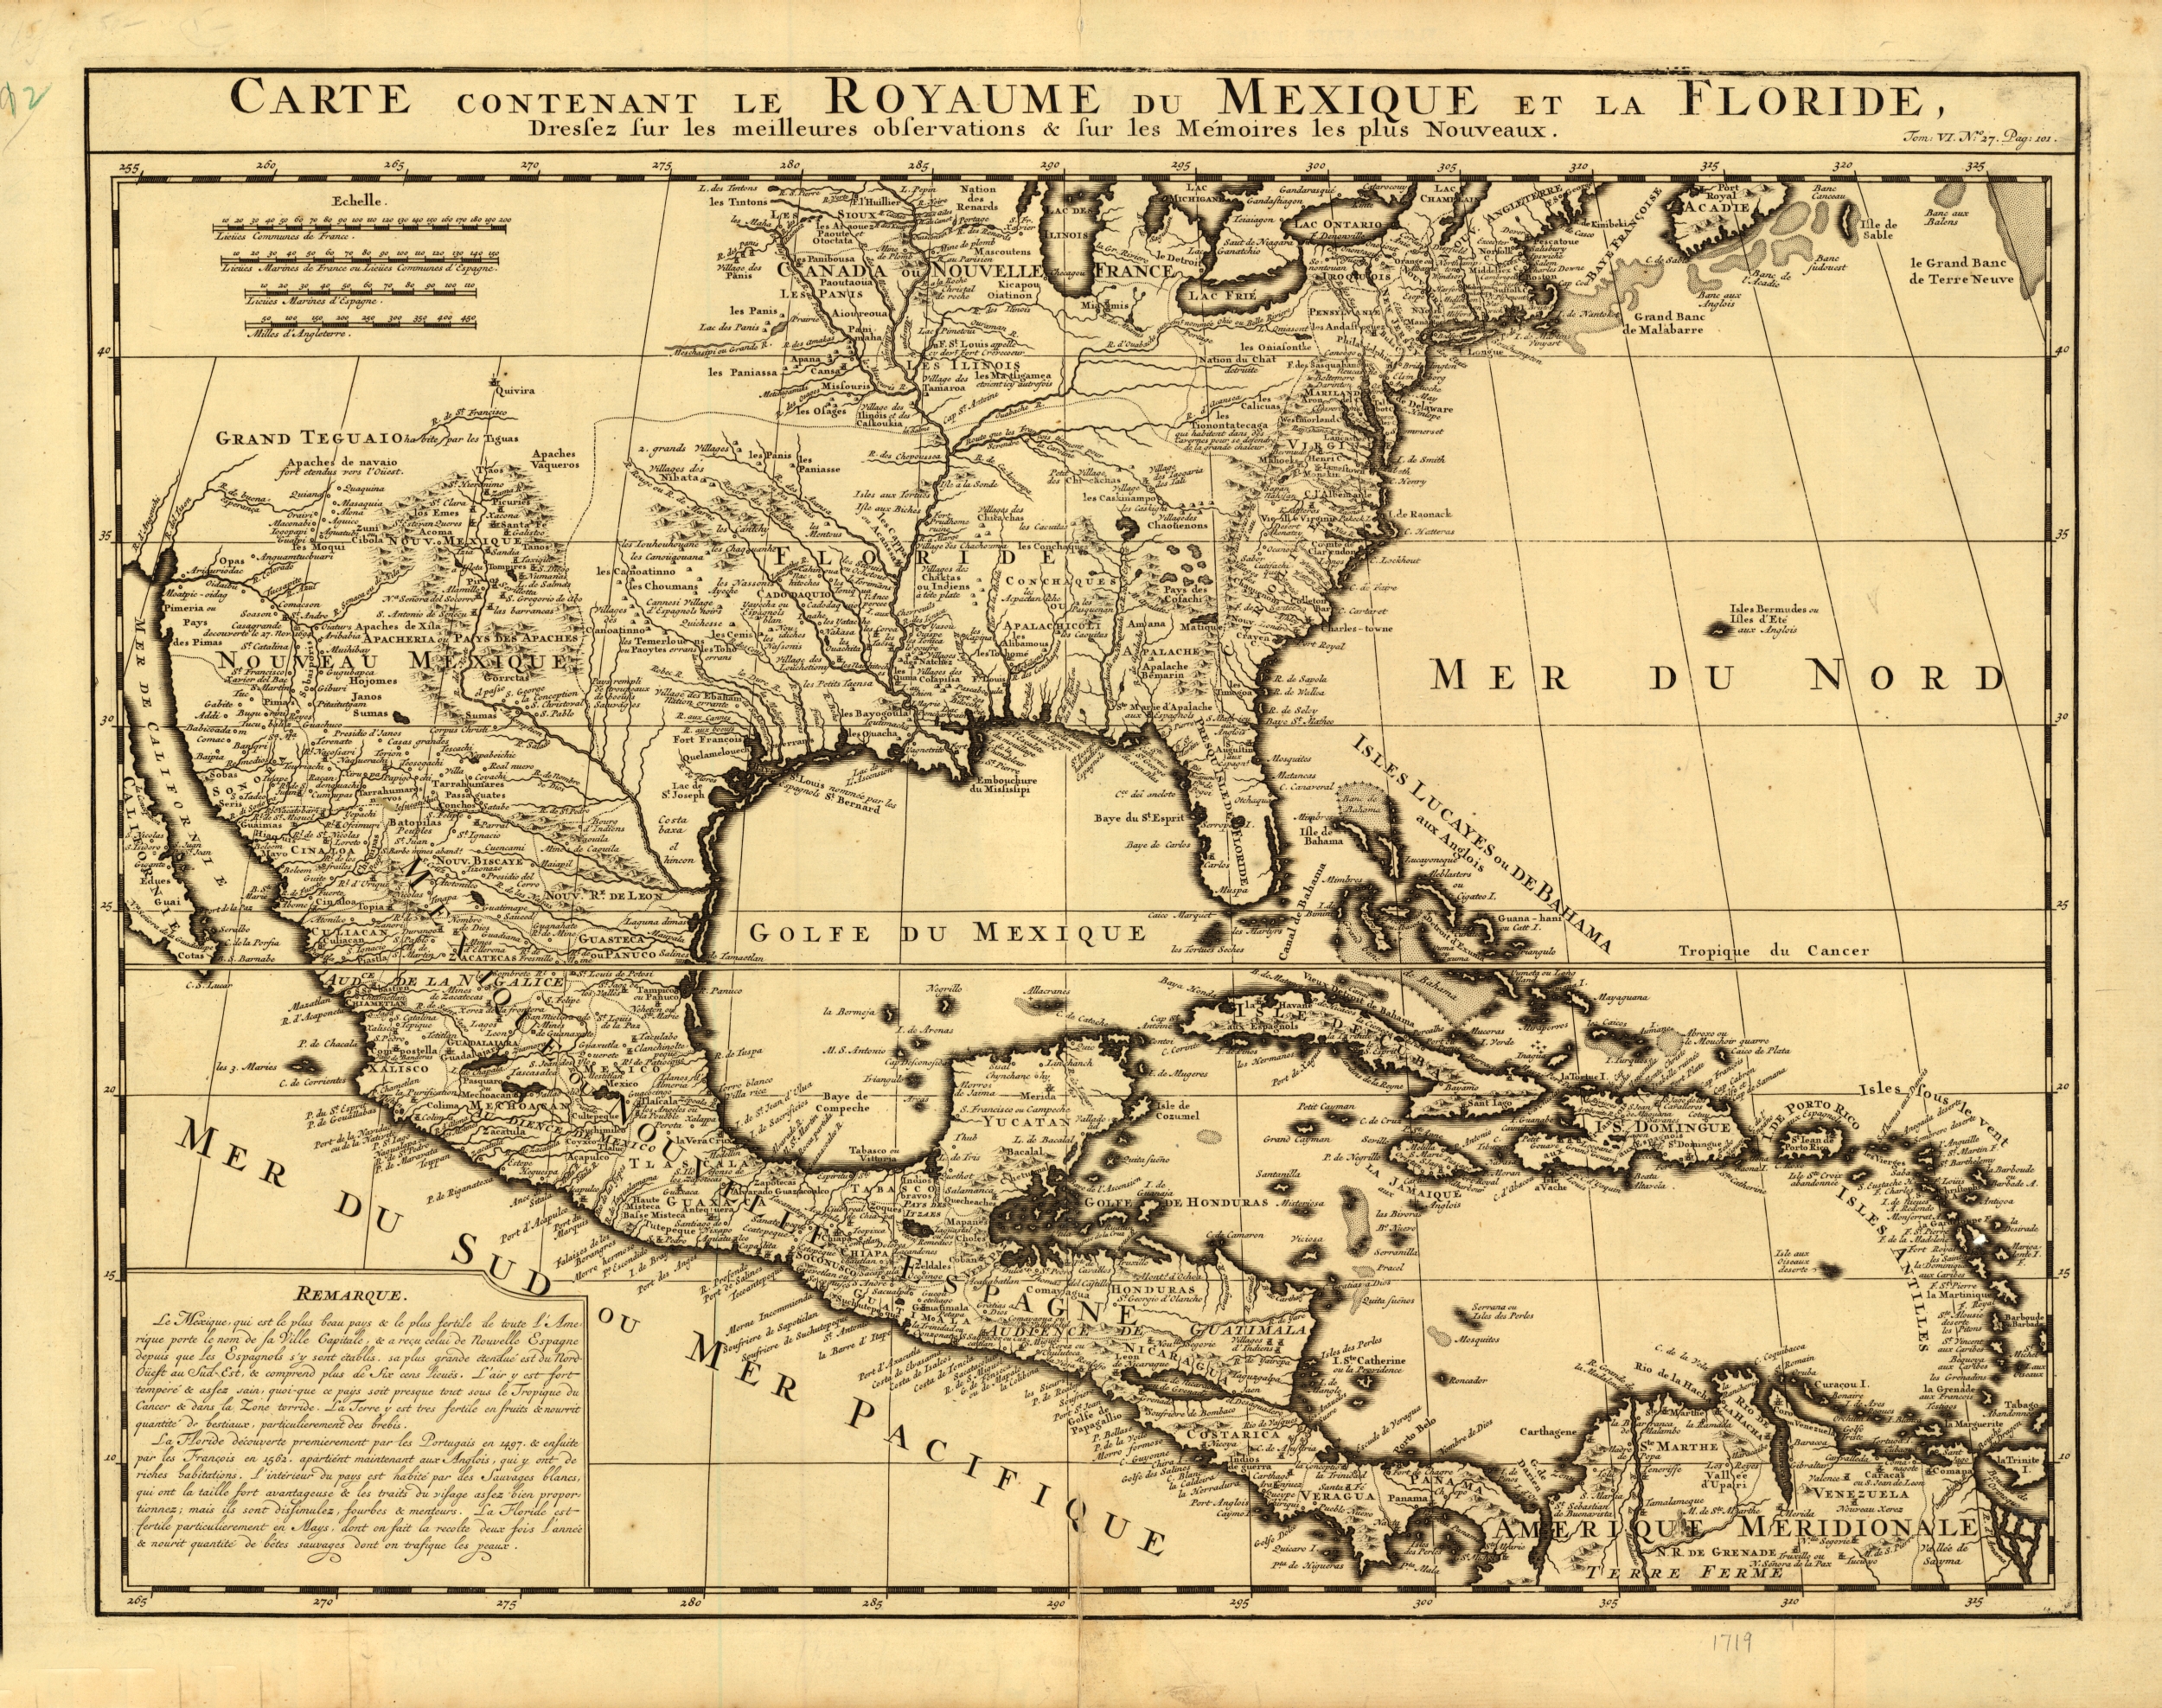 Map of Mexico and Florida, c. 1750